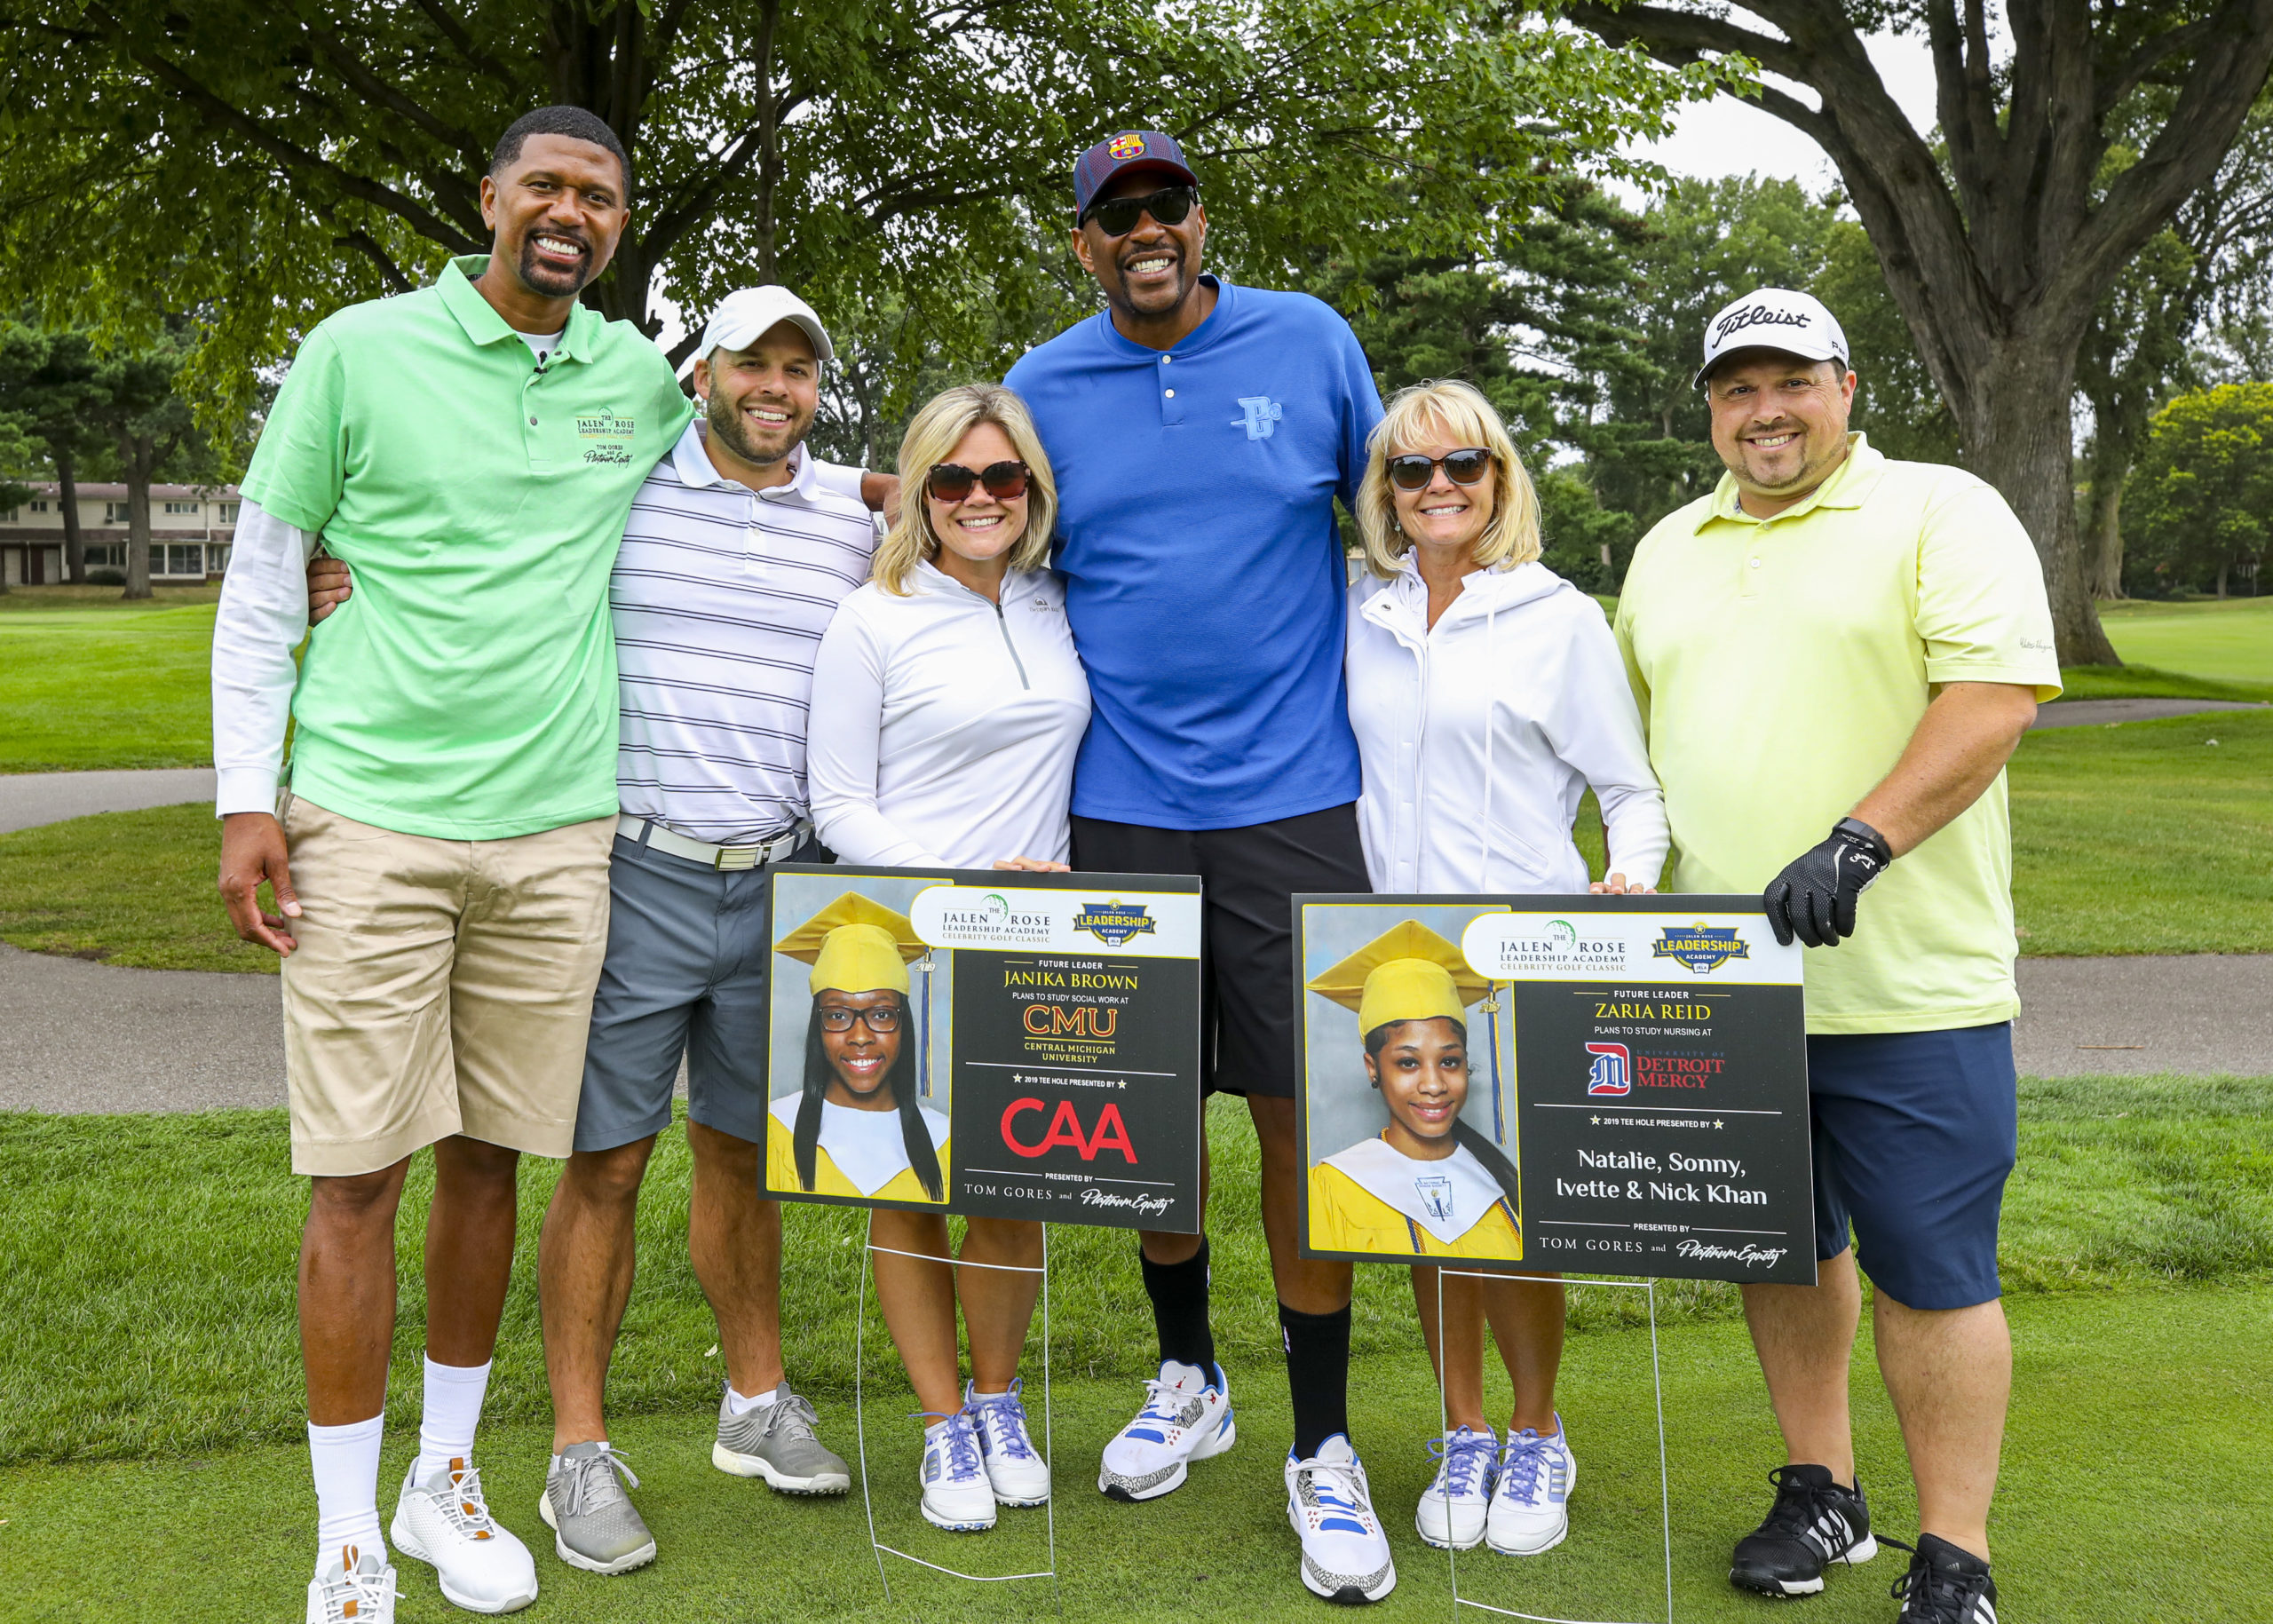 DETROIT, MICHIGAN - AUGUST 26: Former American professional basketball player, current sports analyst for ESPN, and cofounder of the Jalen Rose Leadership Academy, Jalen Rose (L) and 2x NBA Champion - Earl “The Twirl” Cureton pose with guests at the Jalen Rose Leadership Academy Golf Tournament presented by Tom Gores & Platinum Equity held at Detroit Golf Club at Detroit Golf Club on August 26, 2019 in Detroit, Michigan. (Photo by Scott Legato/Getty Images for Jalen Rose Leadership Academy Golf Classic produced by PGD Global )